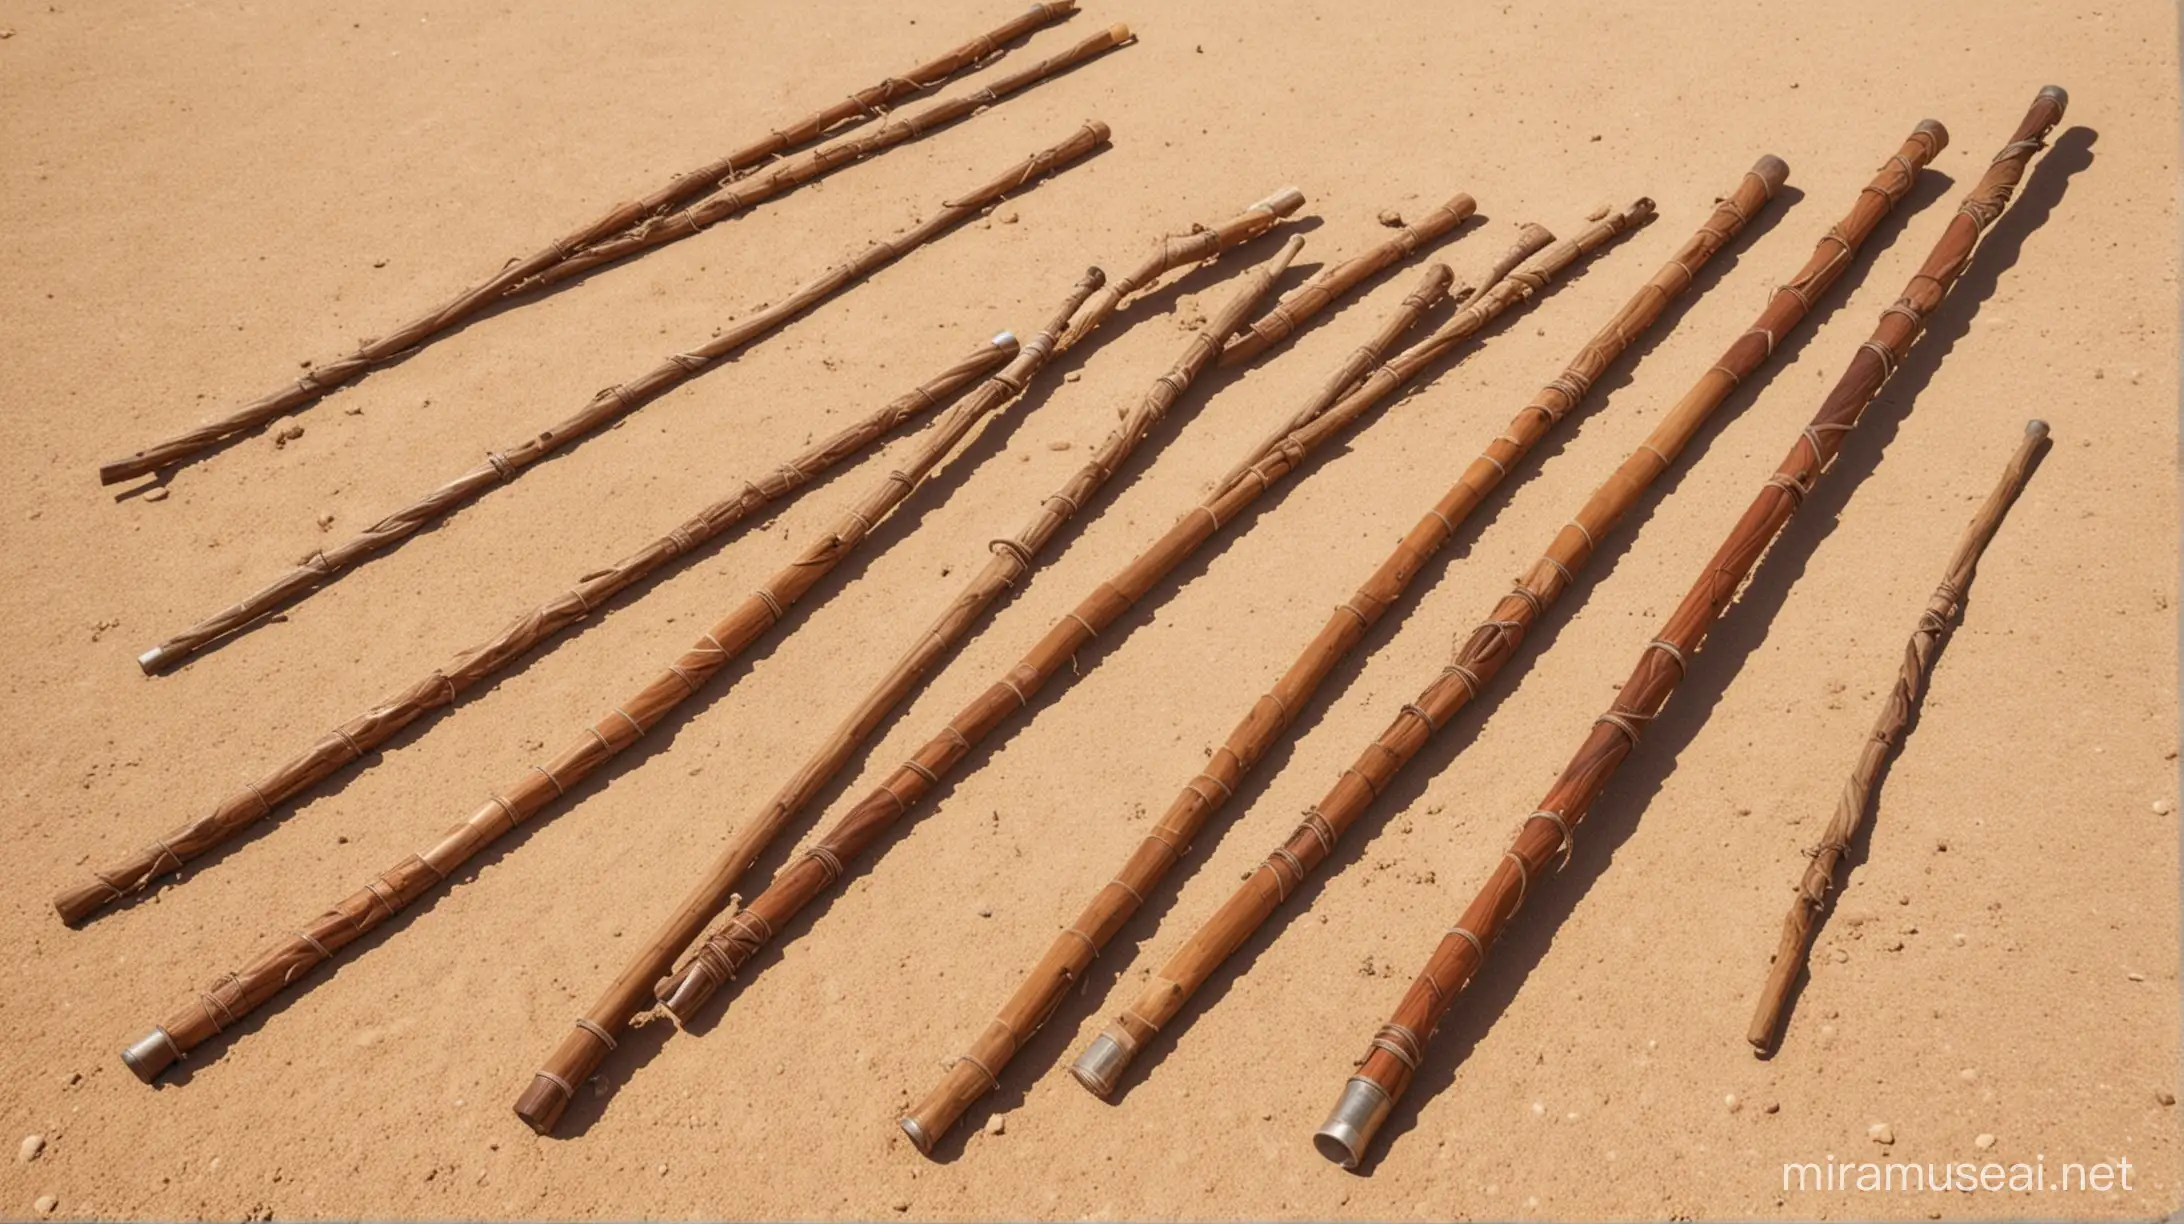 Ancient Desert Scene with Wooden Walking Canes